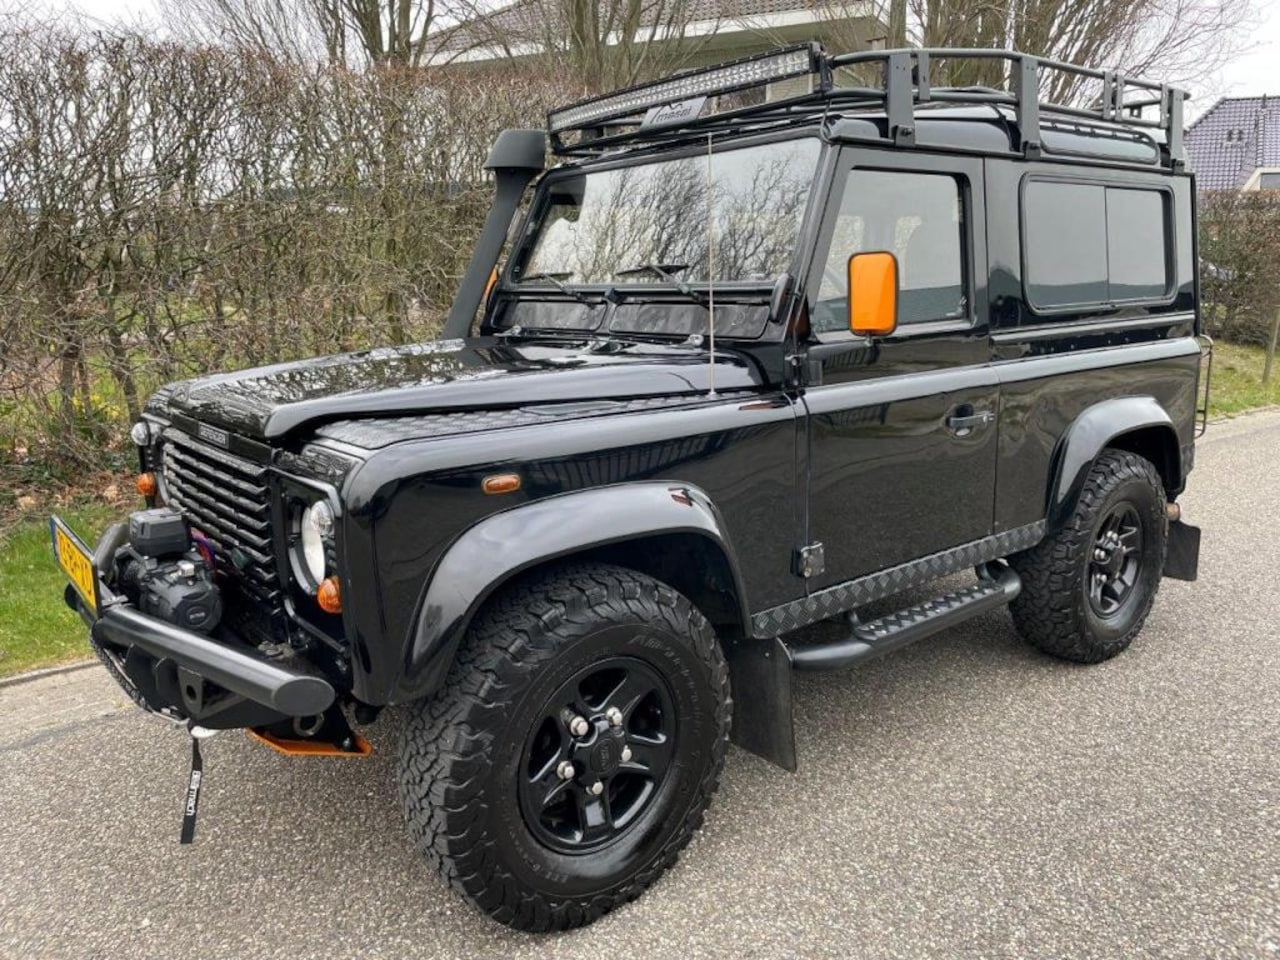 anders Vooravond oneerlijk land rover defender en used – Search for your used car on the parking